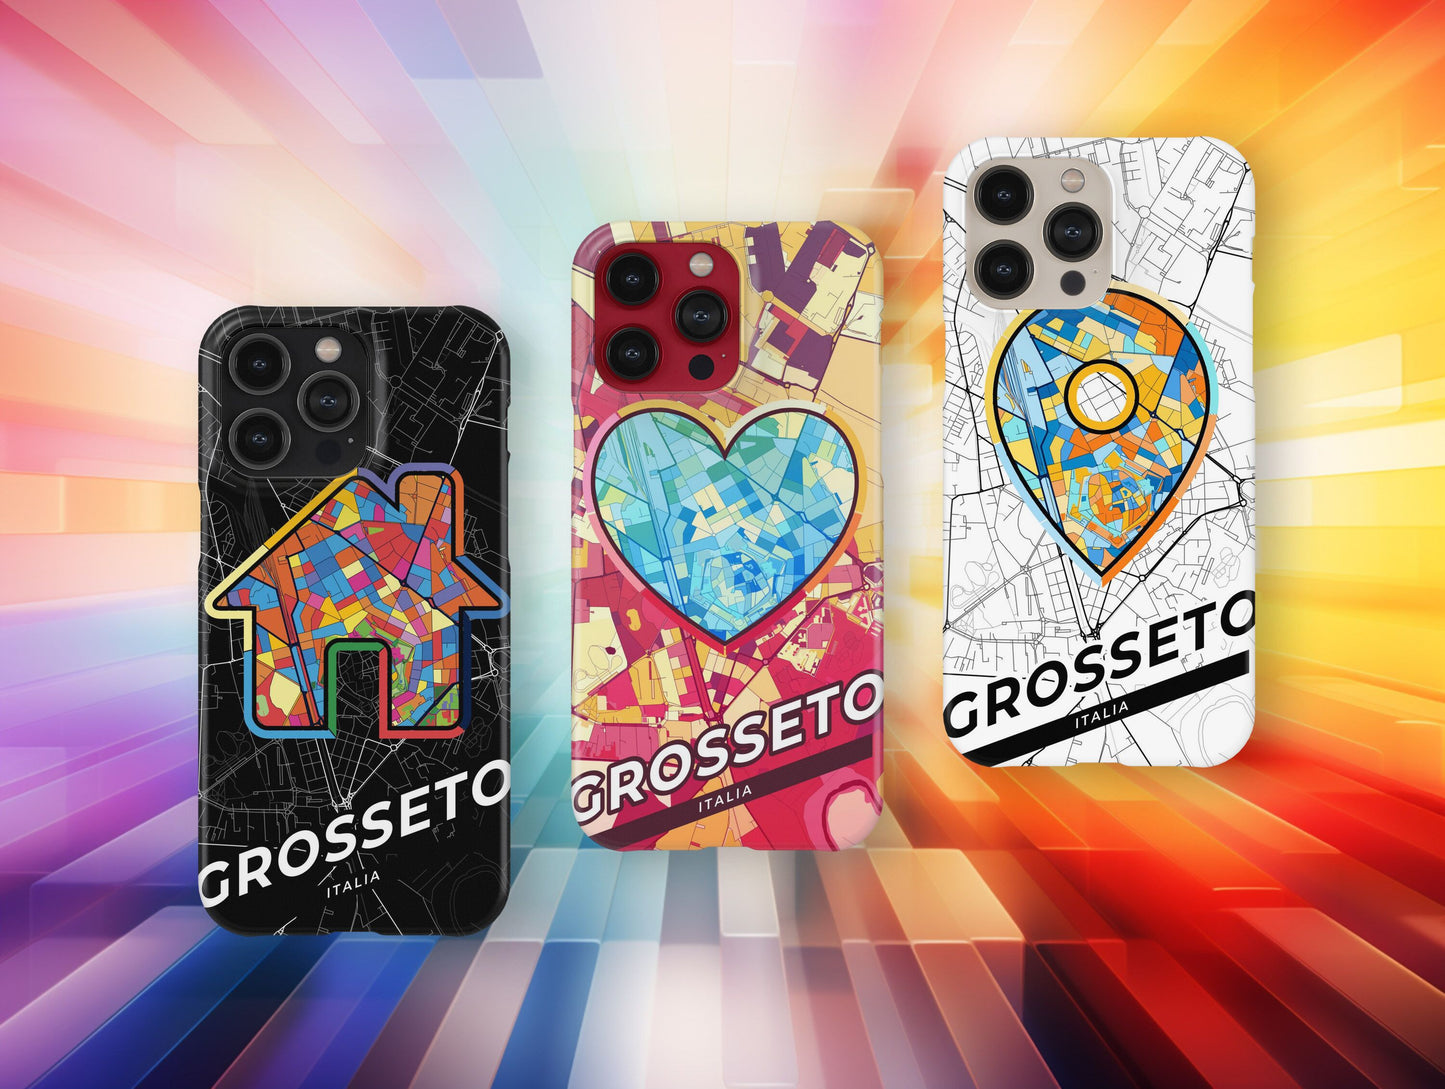 Grosseto Italy slim phone case with colorful icon. Birthday, wedding or housewarming gift. Couple match cases.